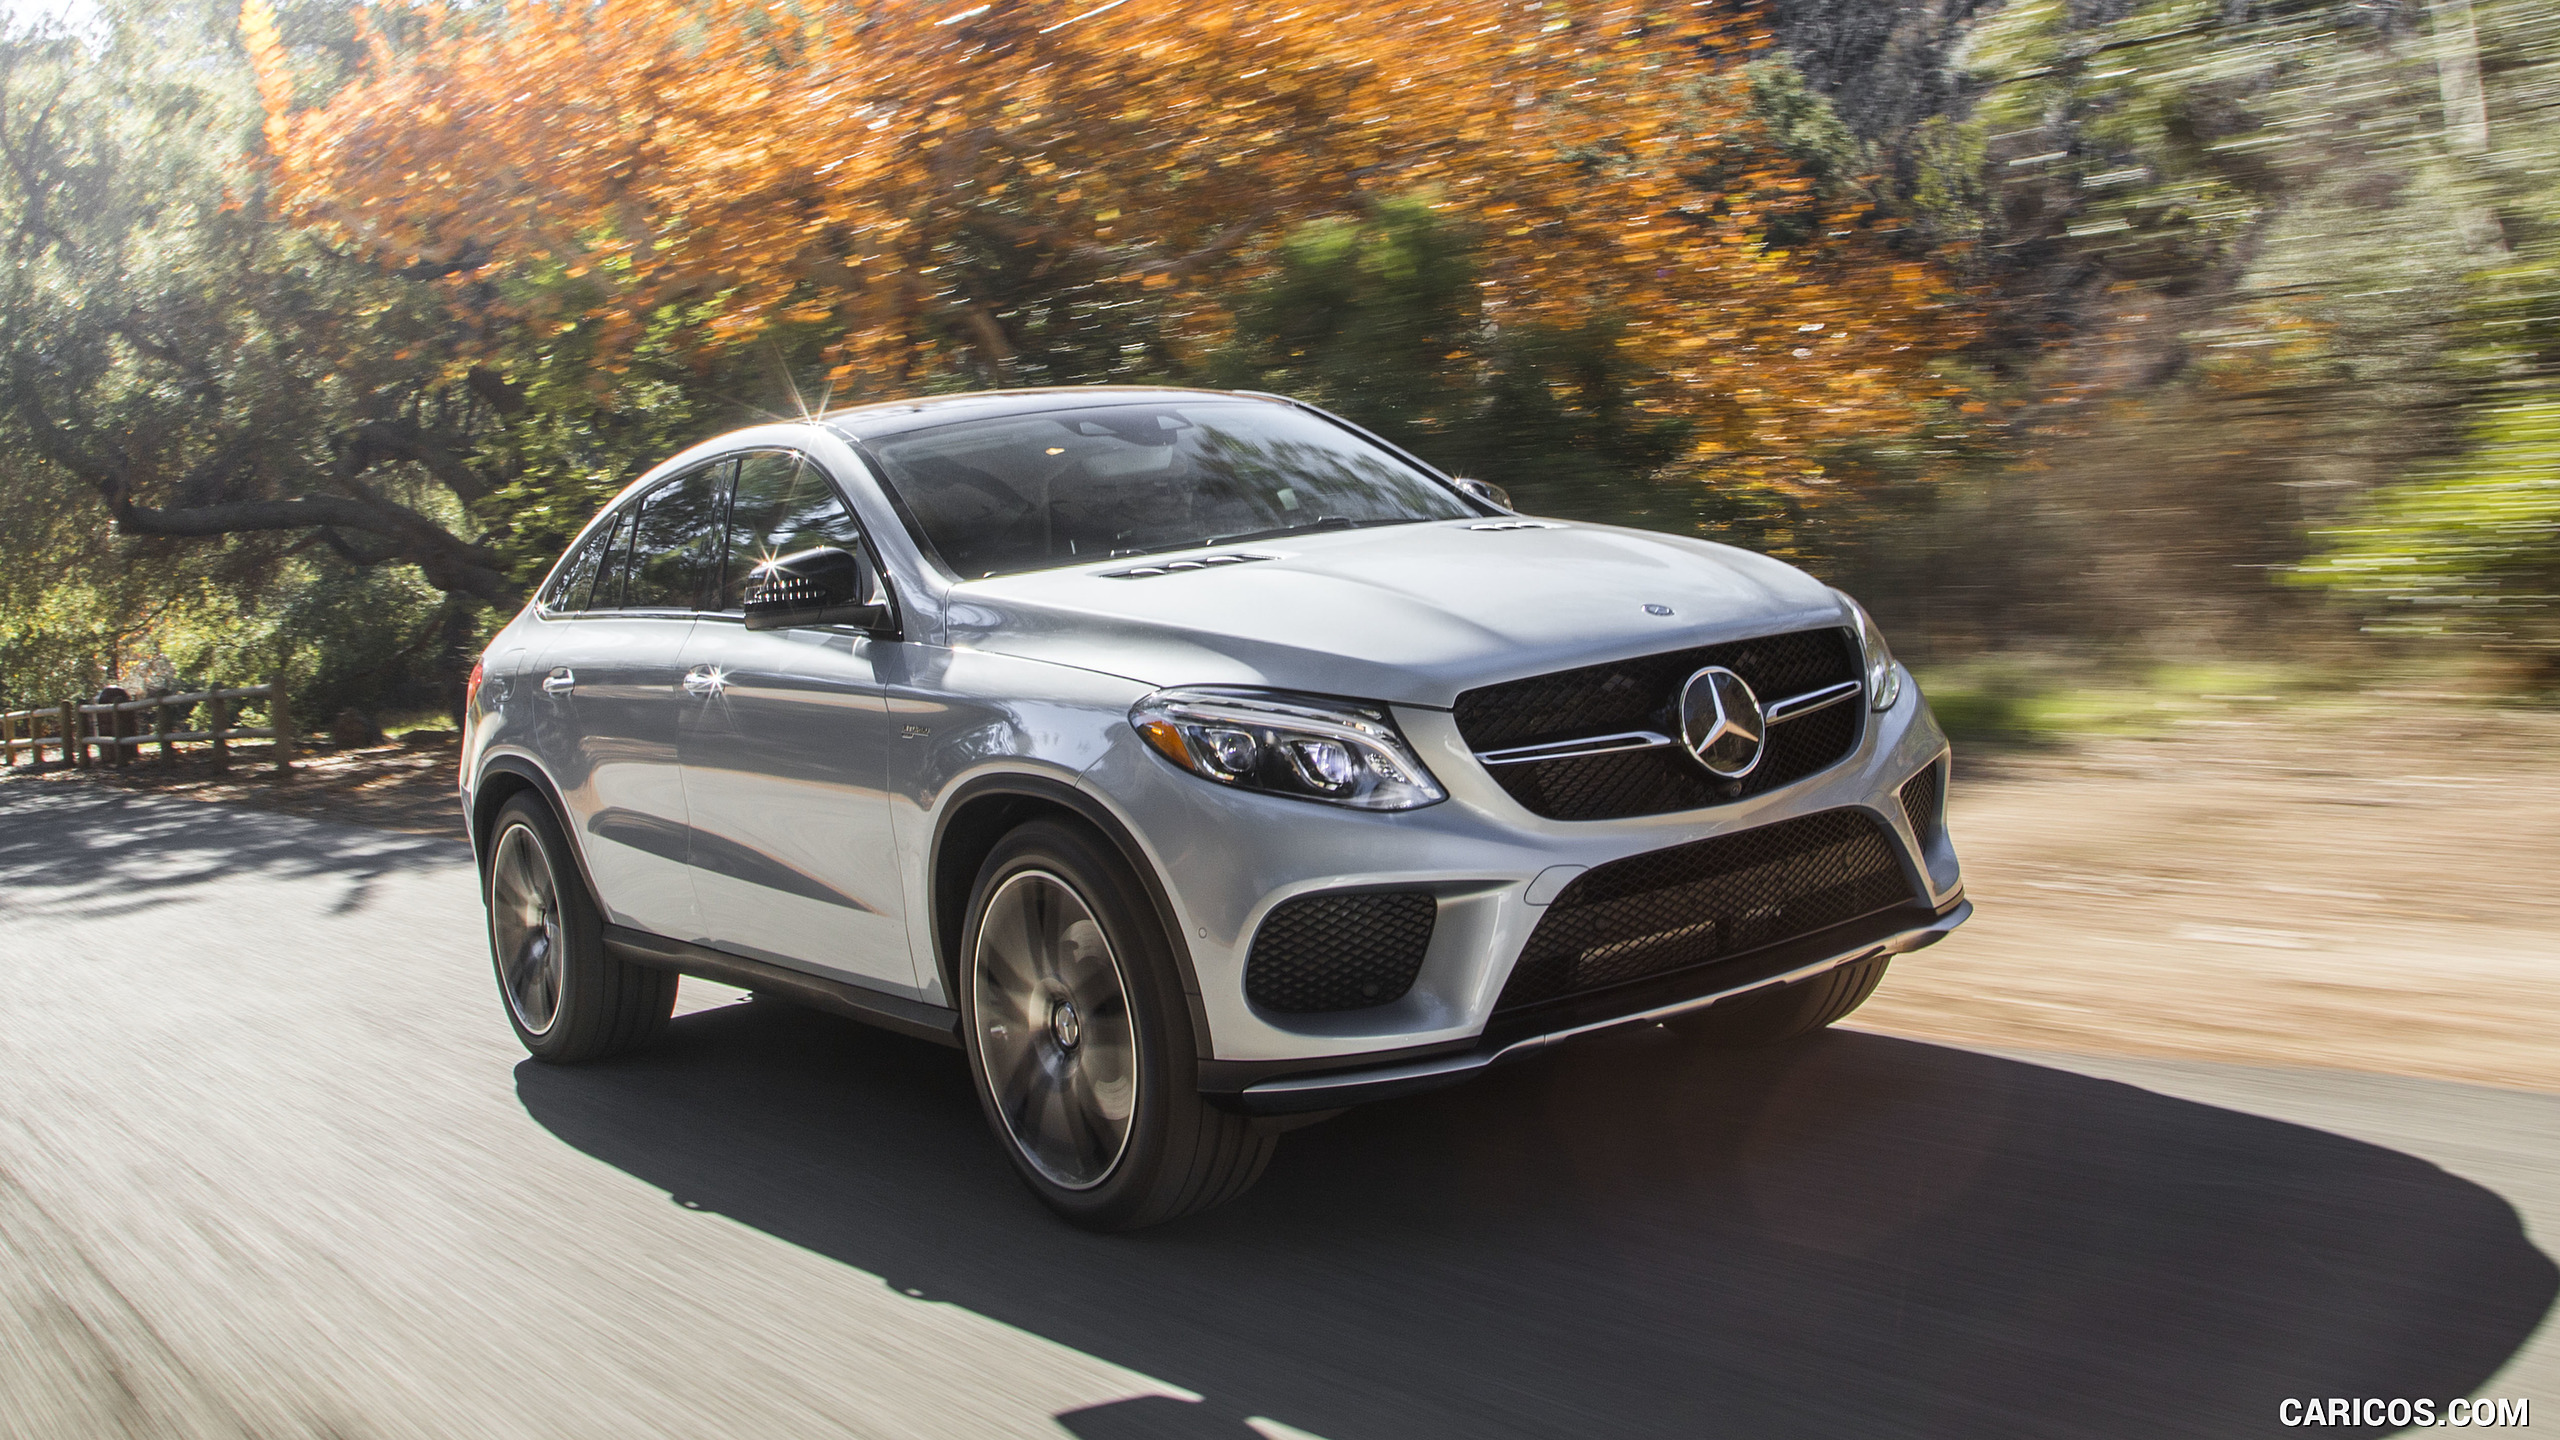 2017 Mercedes-AMG GLE 43 Coupe (US-Spec) - Front Three-Quarter, #4 of 29